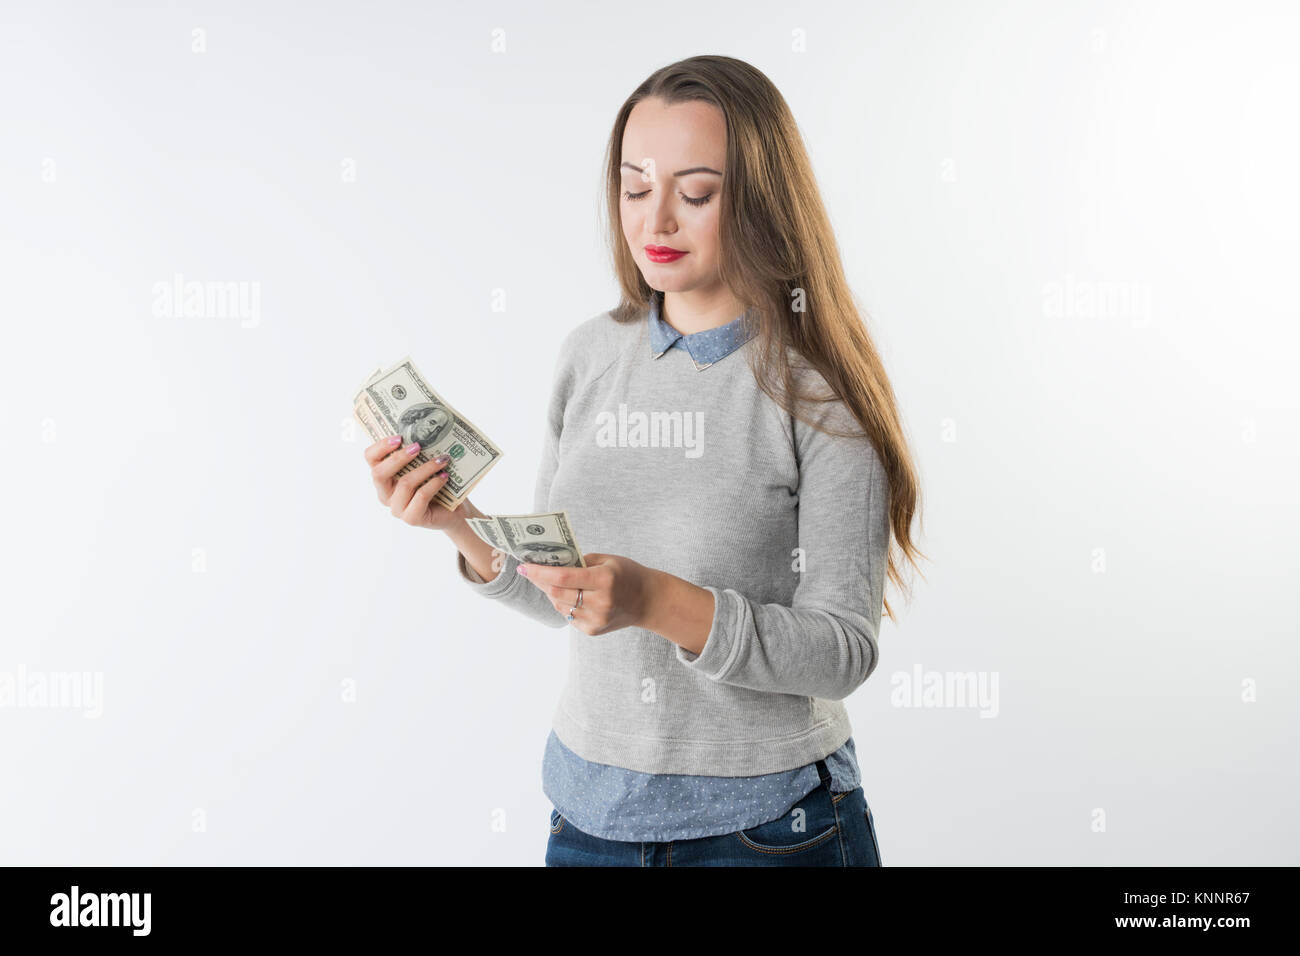 young woman holding dollars cash counting money. Stock Photo